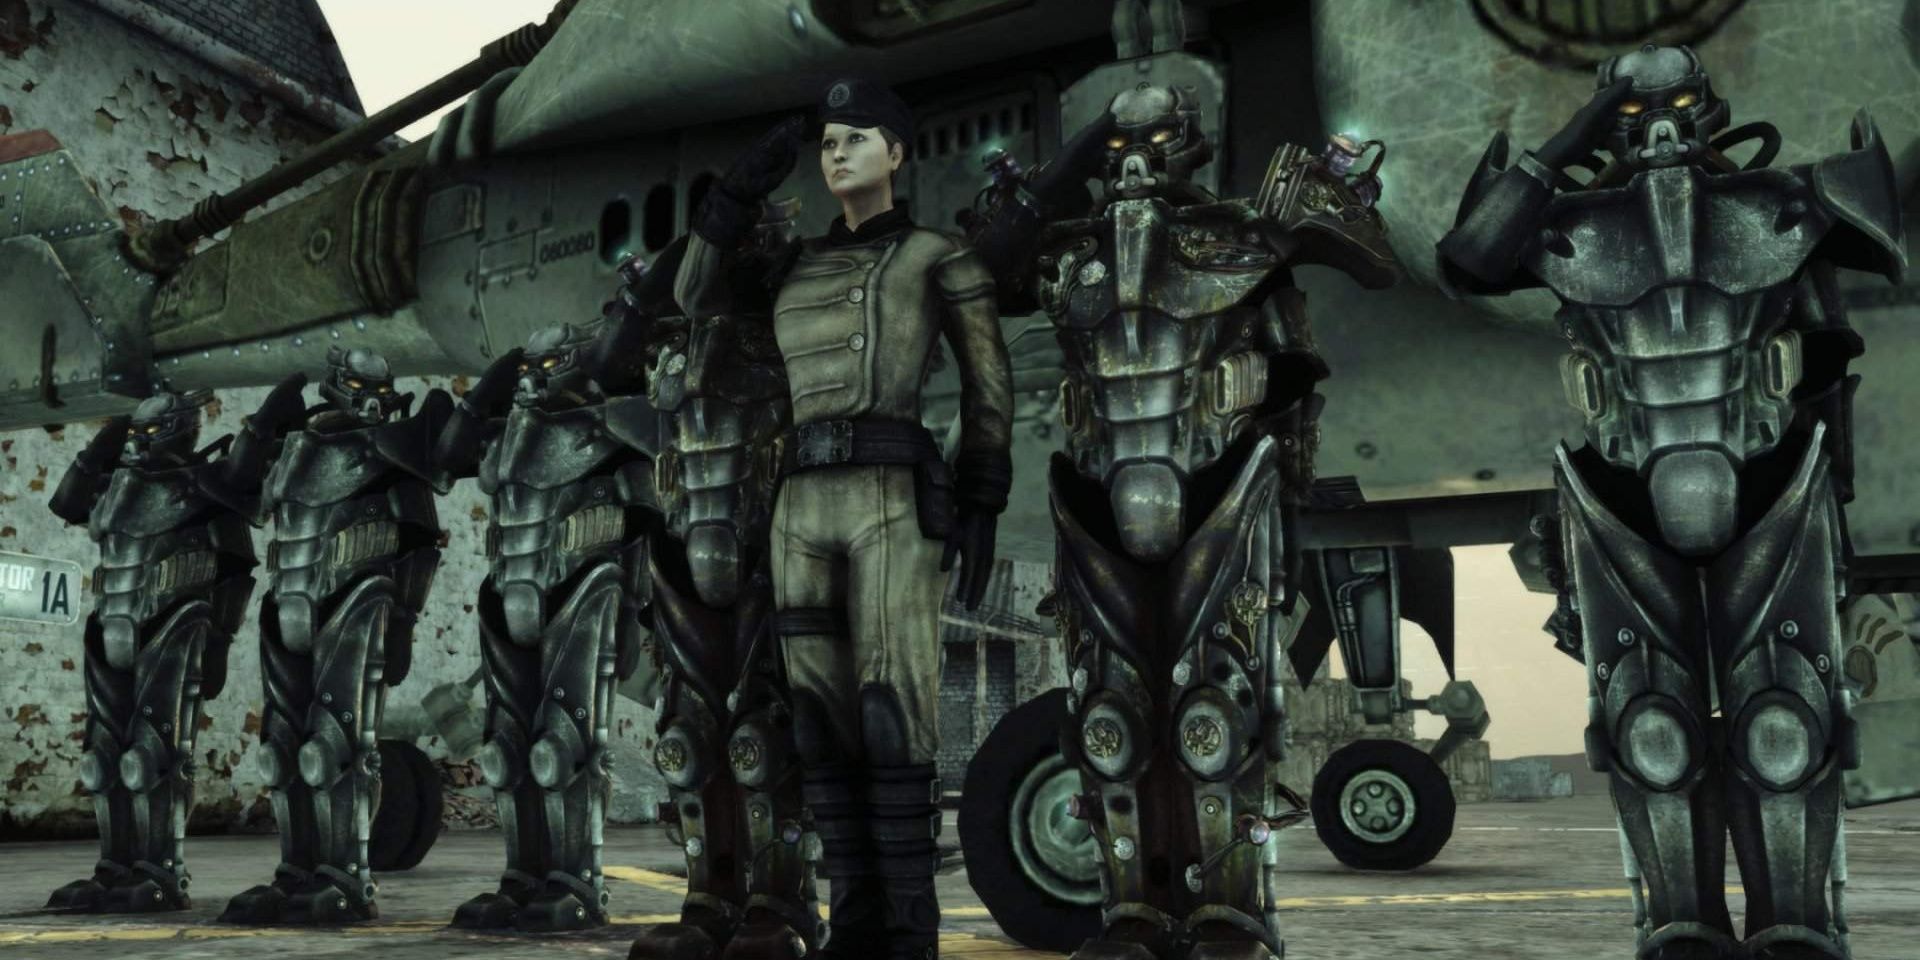 Enclave Soldiers from Fallout 3